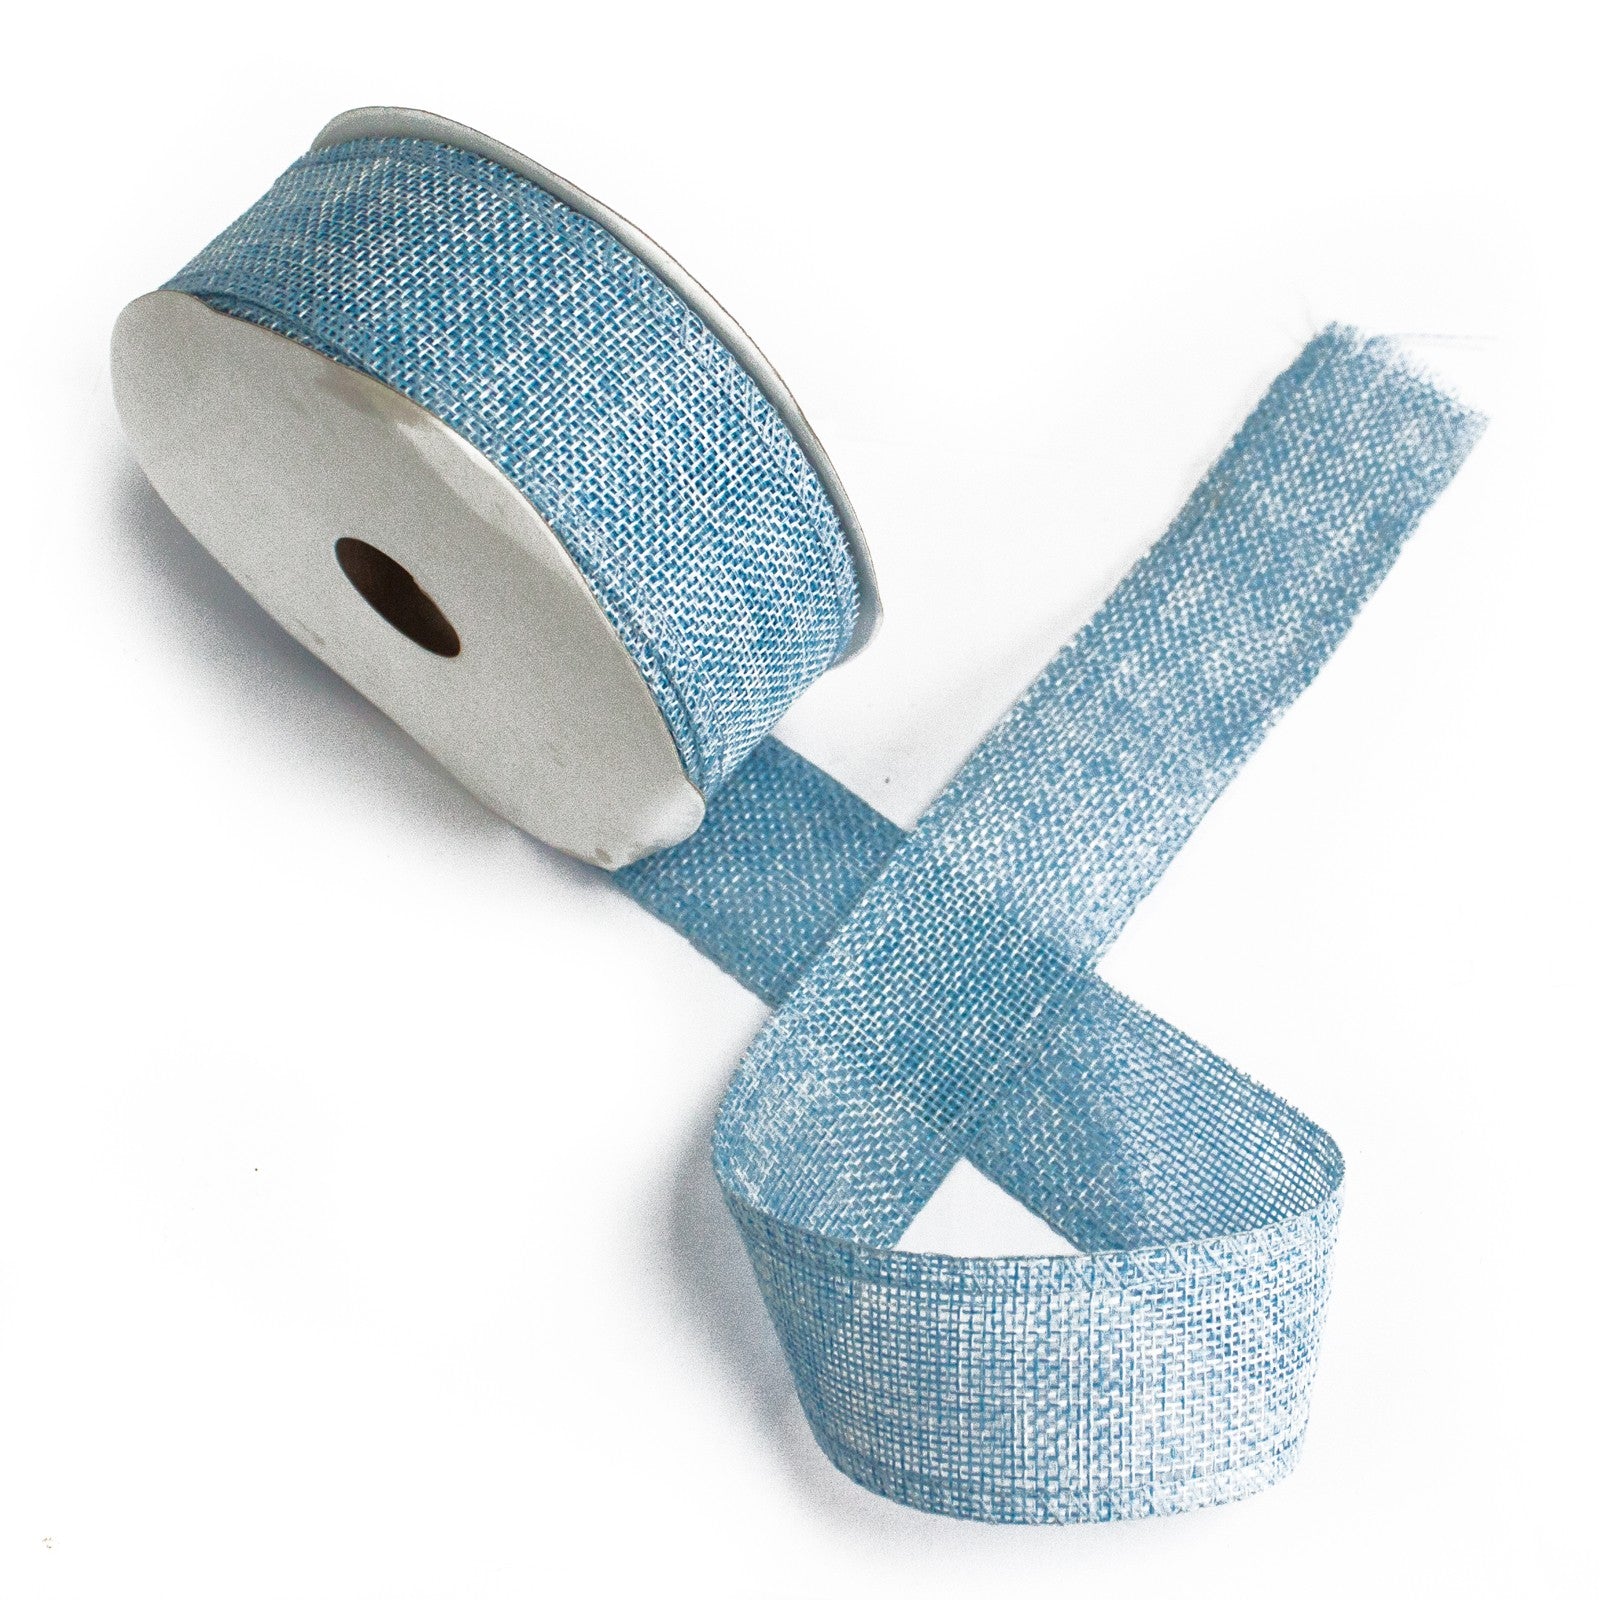 View Natural Texture Ribbon 38mm x 20m Baby Blue information